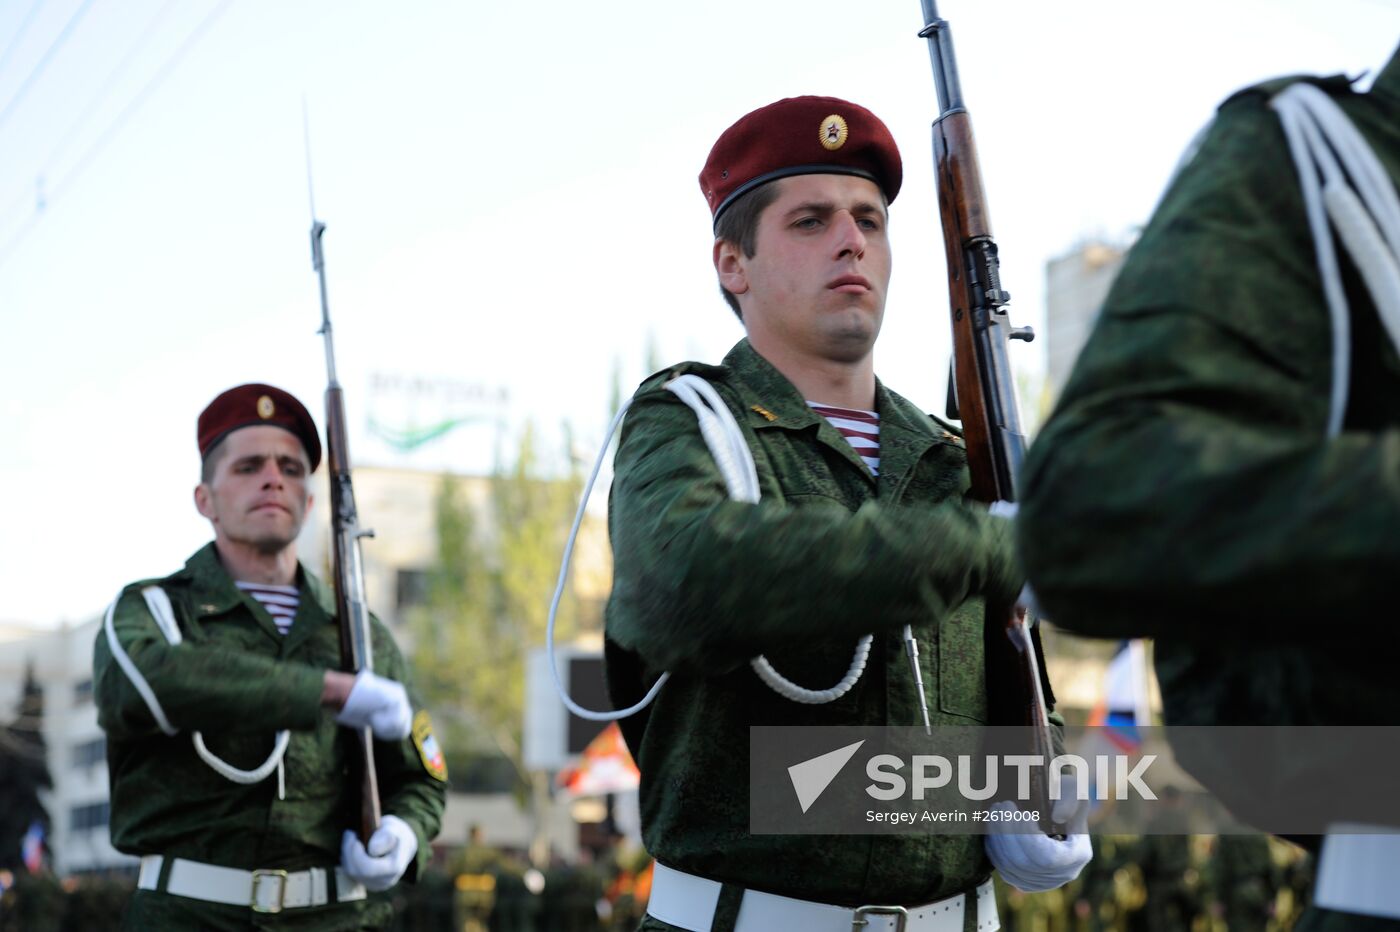 Victory Day parade rehearsal in Donetsk